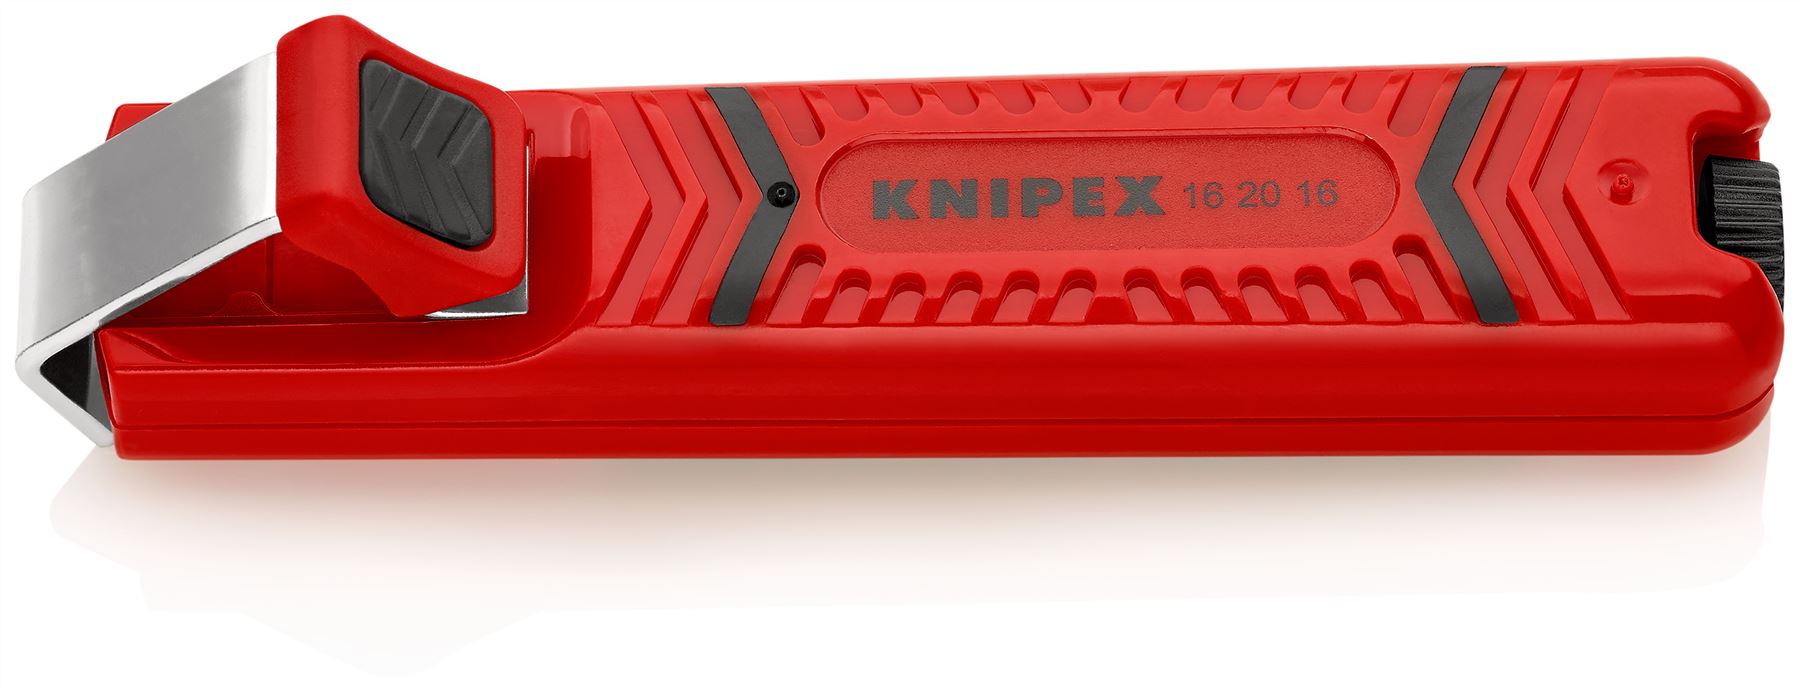 KNIPEX Round Cable Stripping Tool with Scalpel Blade 130mm for 4-16mm Diameter 16 20 16 SB